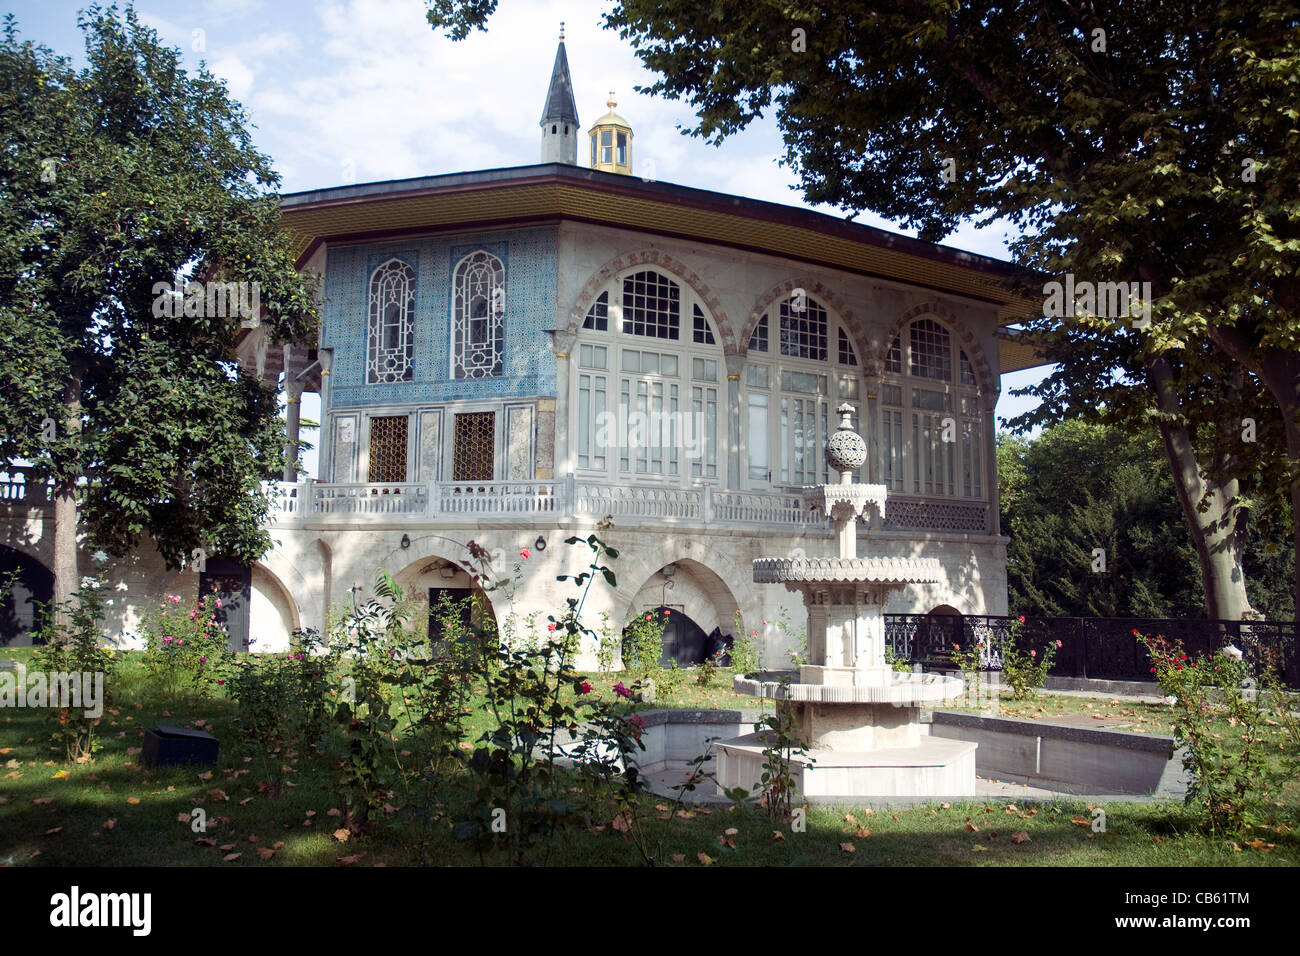 One of many elegant pavilions in the gardens of the vast complex that is Istanbul's Topkapi palace museum Stock Photo